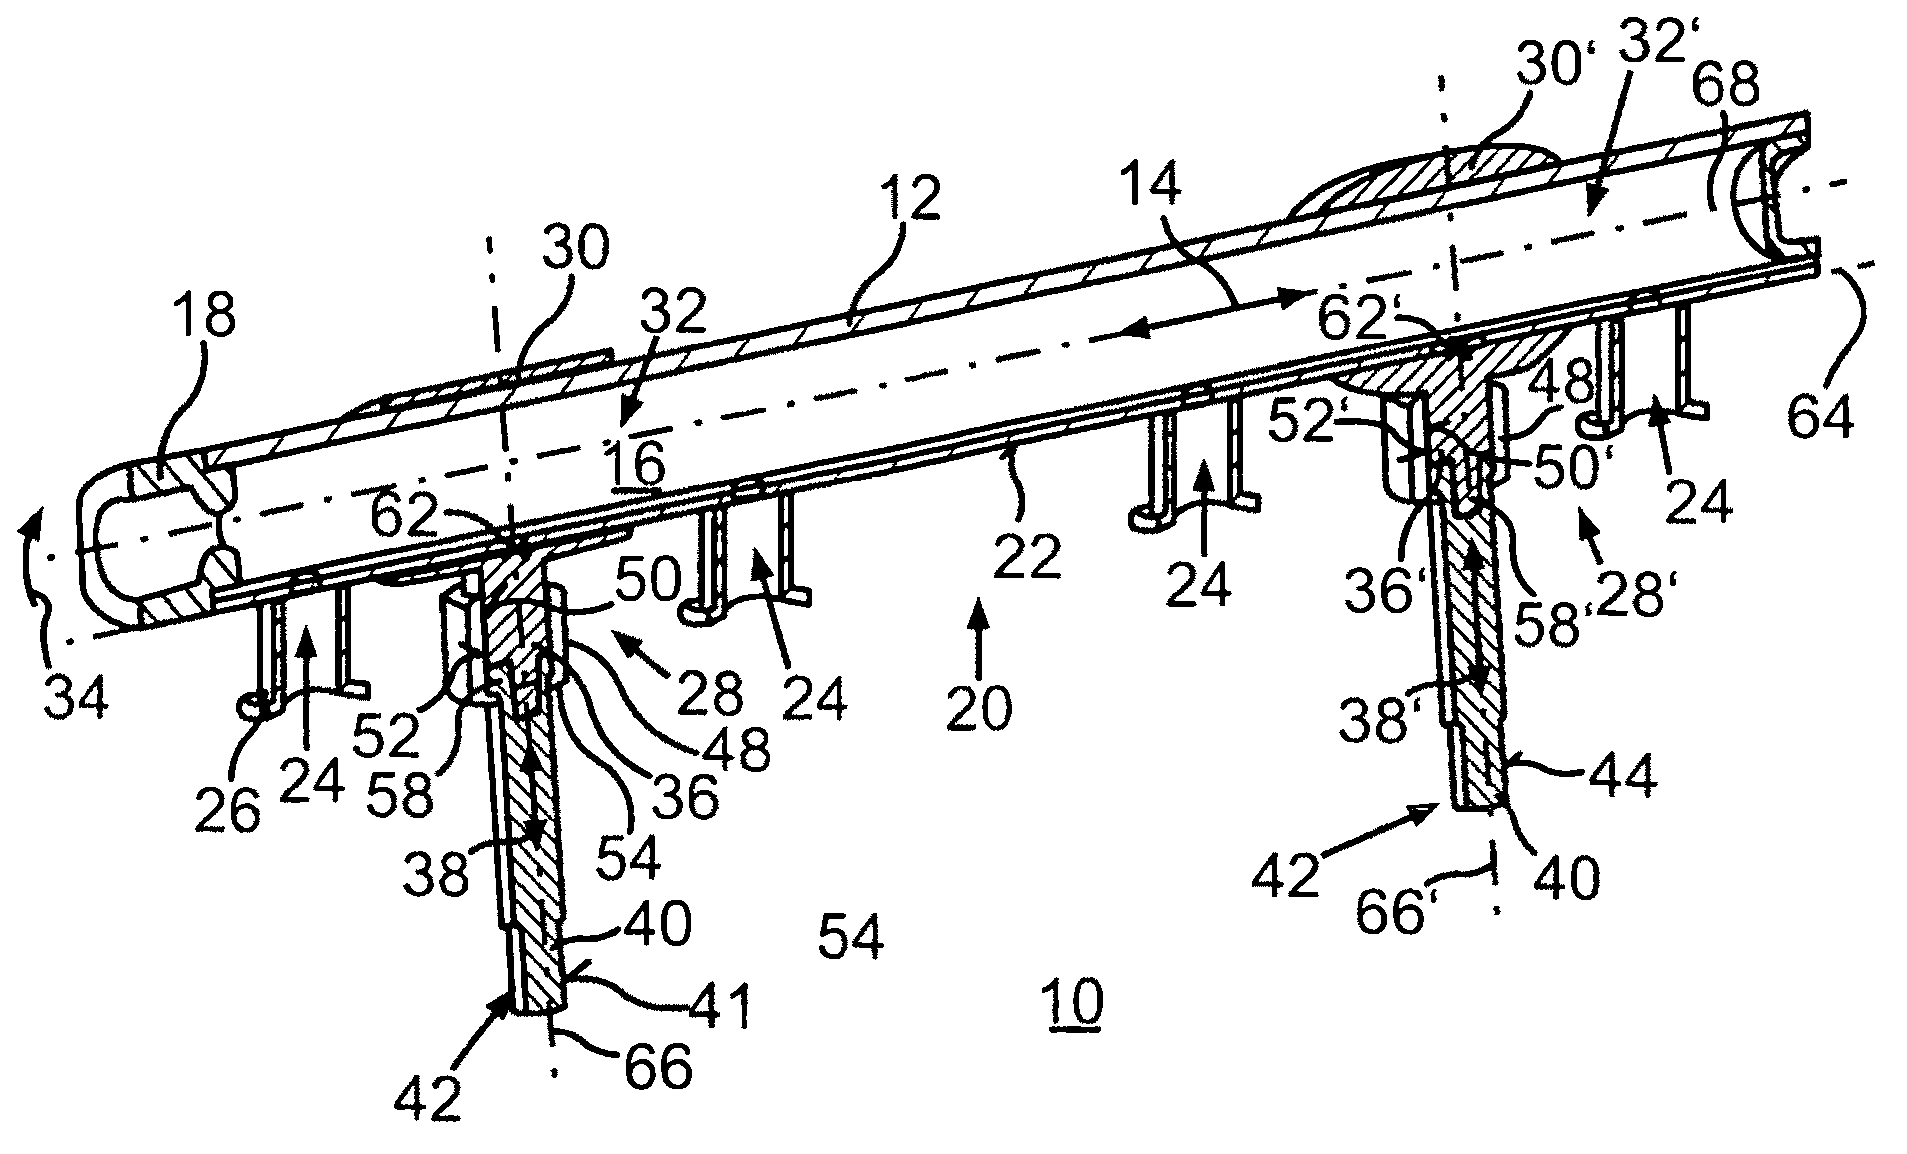 A fastening arrangement of a fuel supply device on an internal combustion engine, and a method for fastening a fuel supply device to the internal combustion engine